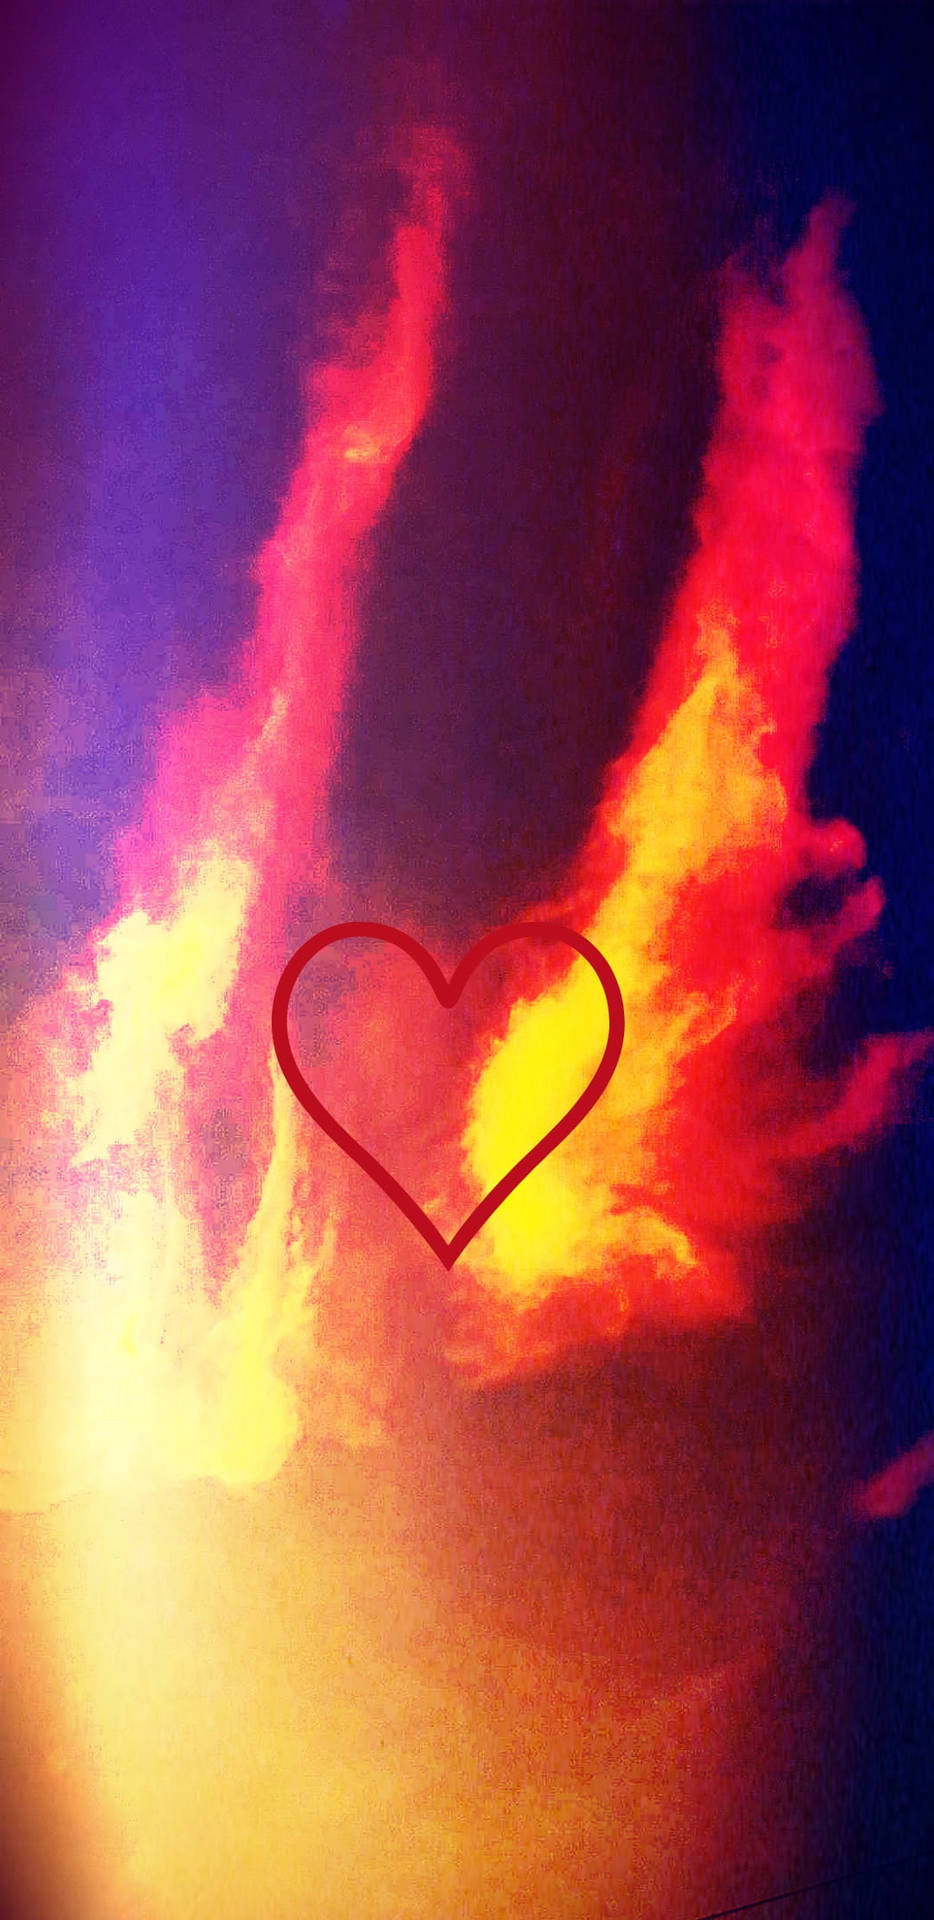 Dramatic Aesthetic Heart With Flames Wallpaper